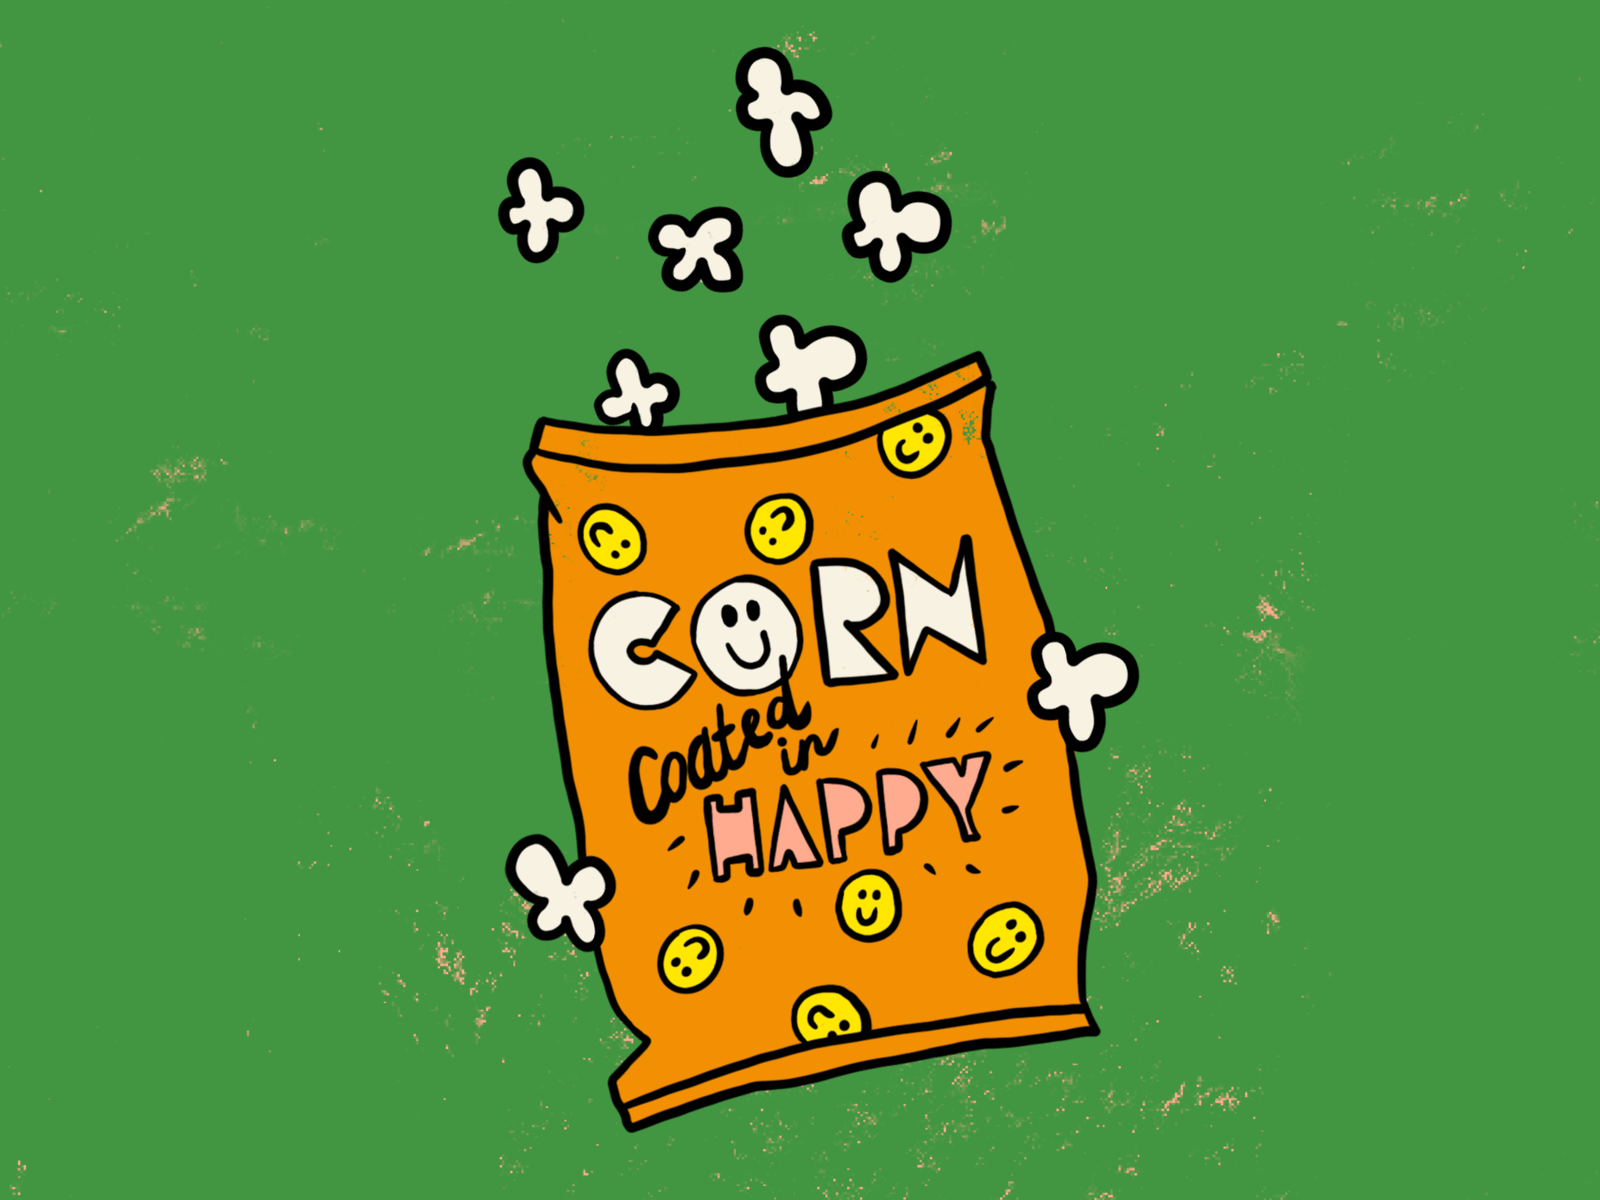 Corn Coated in Happy 2d 2d animation animation branding design gif good vibes green happy illustration logo mental health mental health awareness popcorn popcorn branding popcorn illustration positive smiley smiley face typography